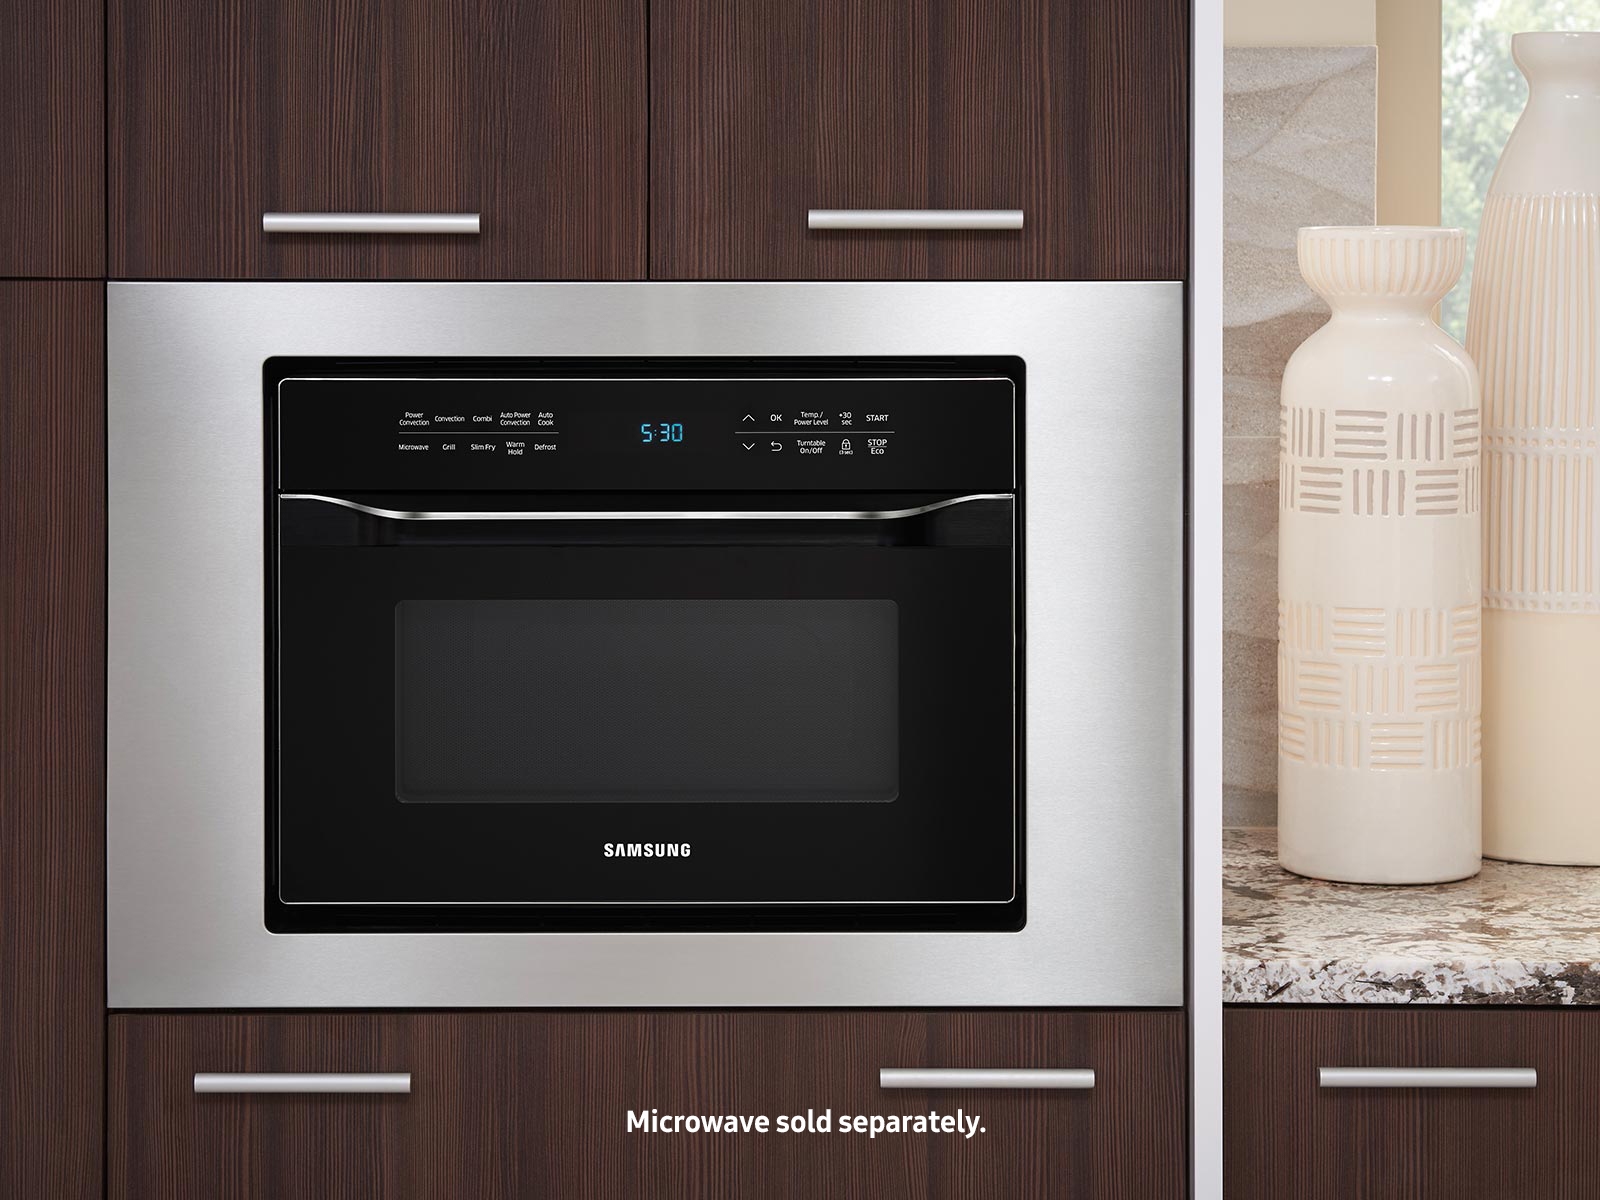 https://image-us.samsung.com/SamsungUS/home/home-appliances/home-appliances-accessories/microwaves/pd/ma-tk3080ct/04_Microwave_Countertop_Lifestyle_MC12J8035CT_Trim_Kit_MA-TK3080CT_Closed_Silver.jpg?$product-details-jpg$